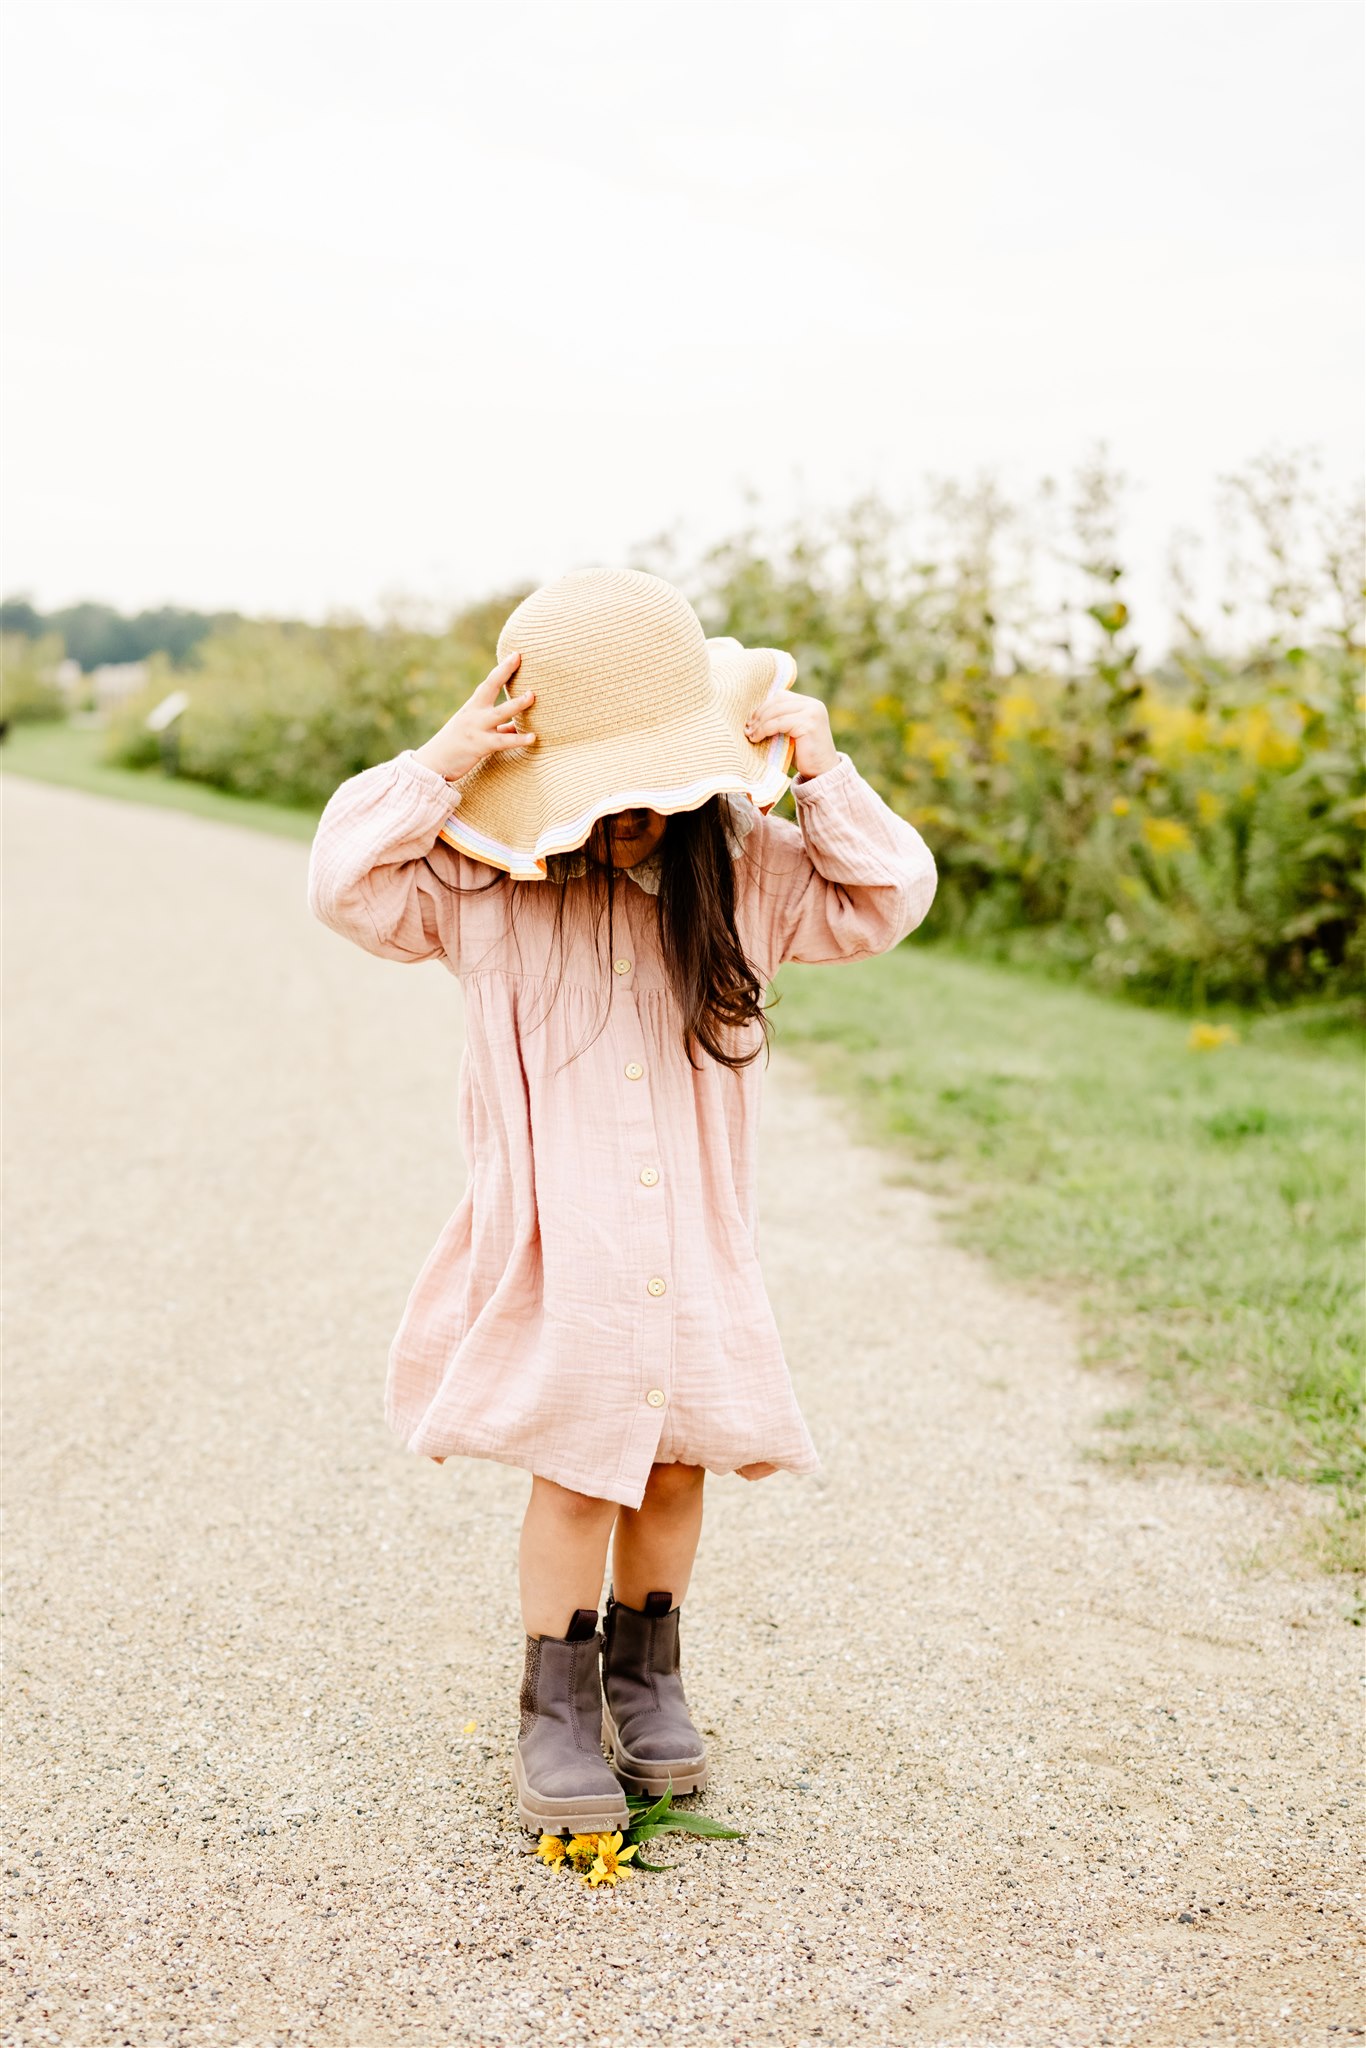 A young girl walks through a park in a pink dress and large sun hat before visiting Dance Academy Chicago